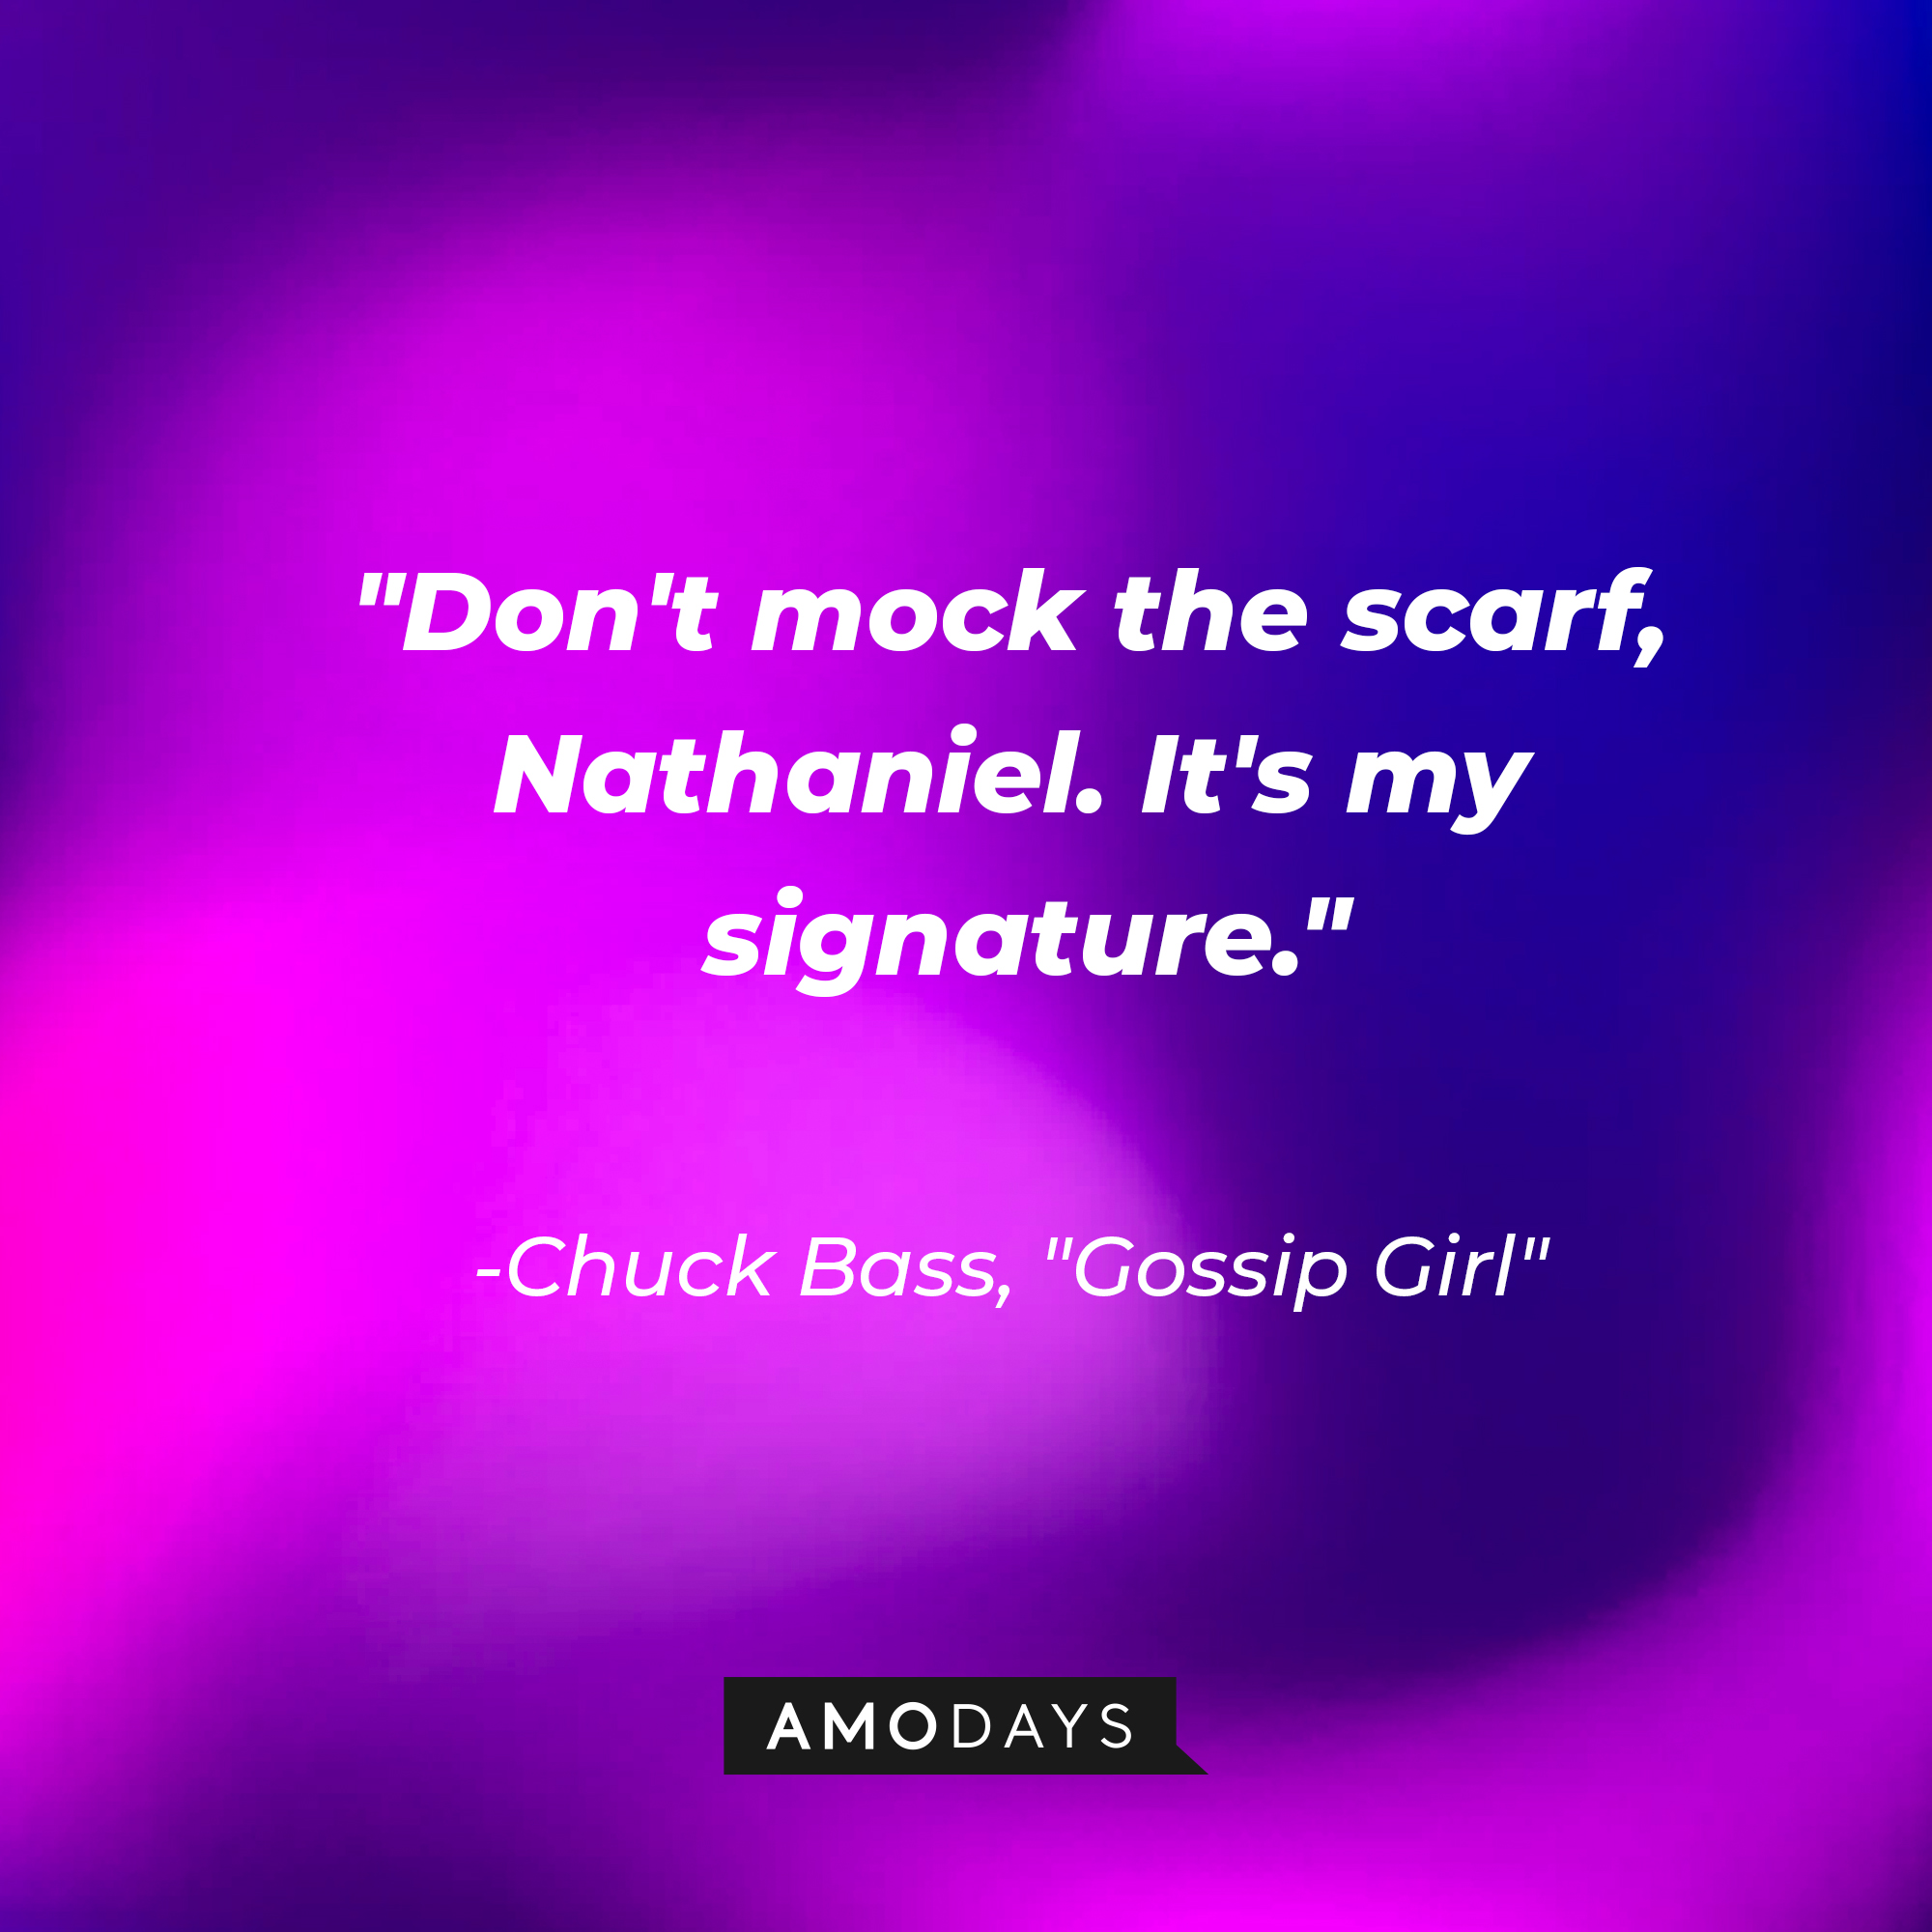 Chuck Bass' quote: "Don't mock the scarf, Nathaniel. It's my signature." | Source: AmoDays